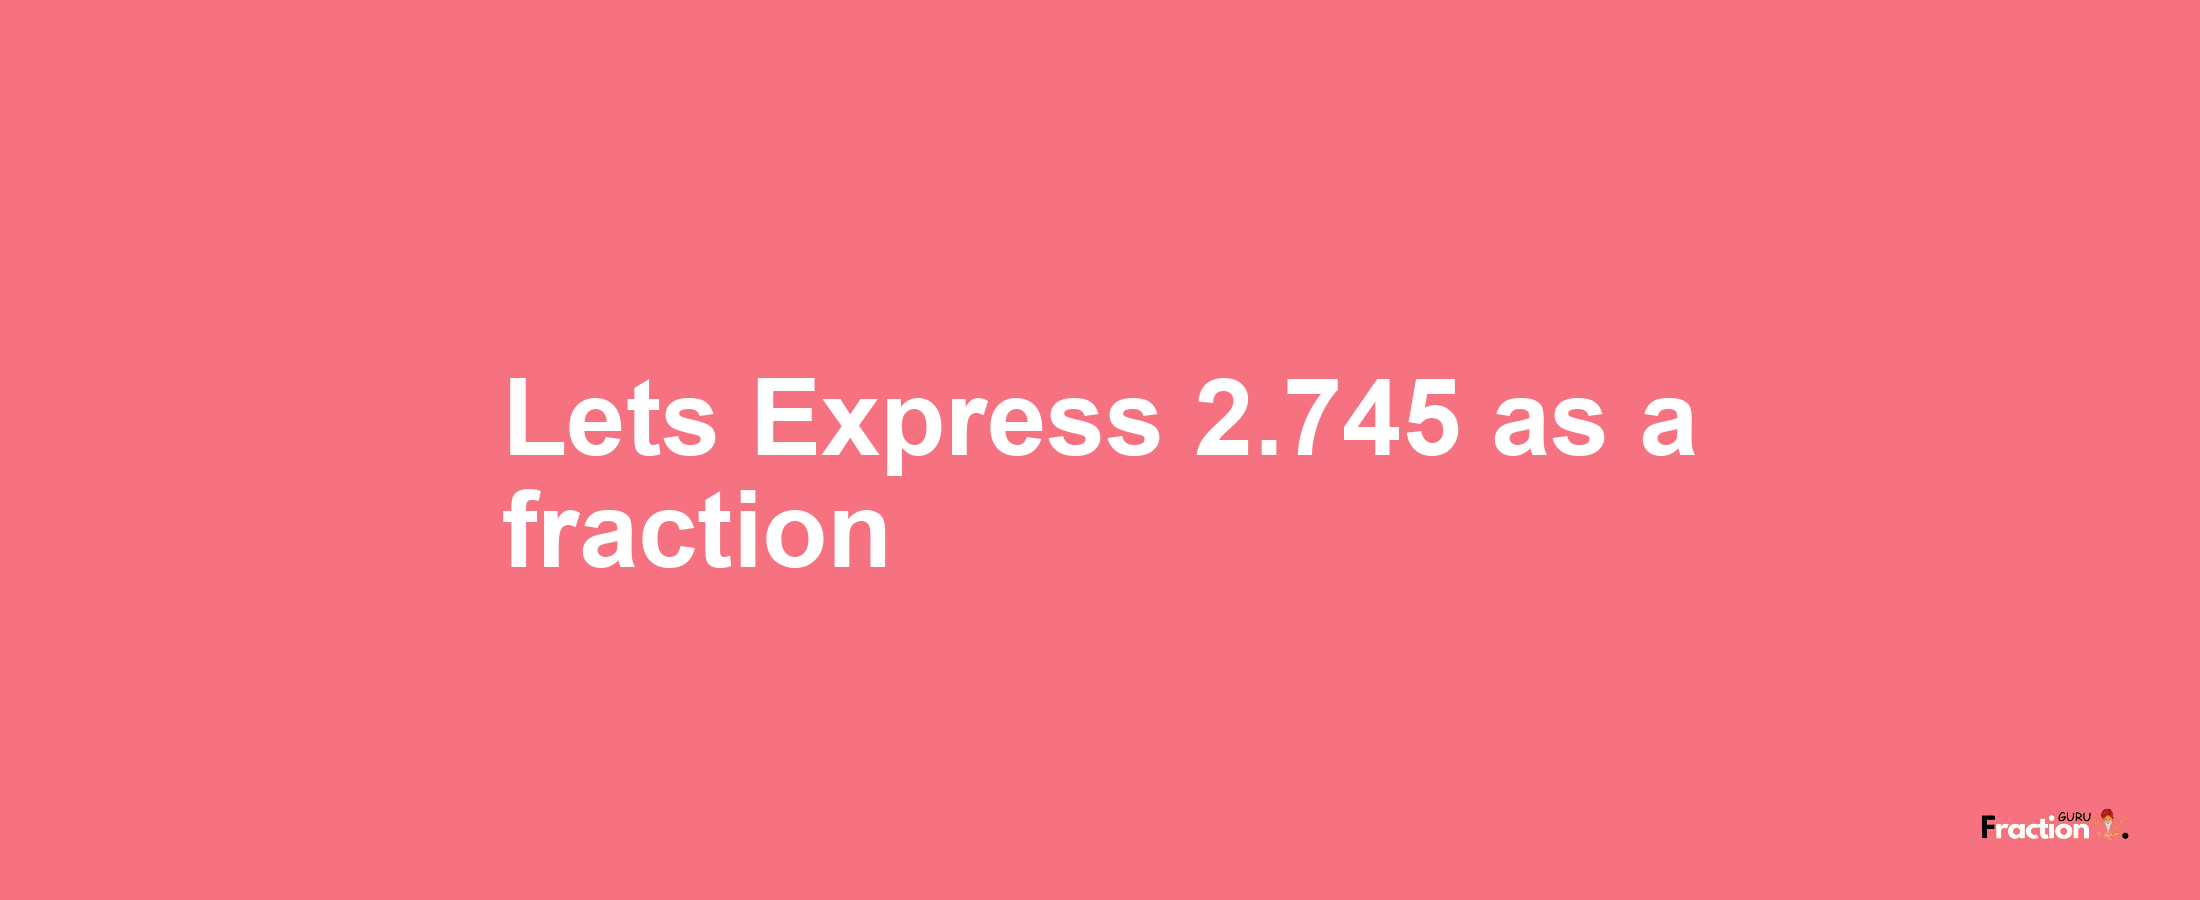 Lets Express 2.745 as afraction